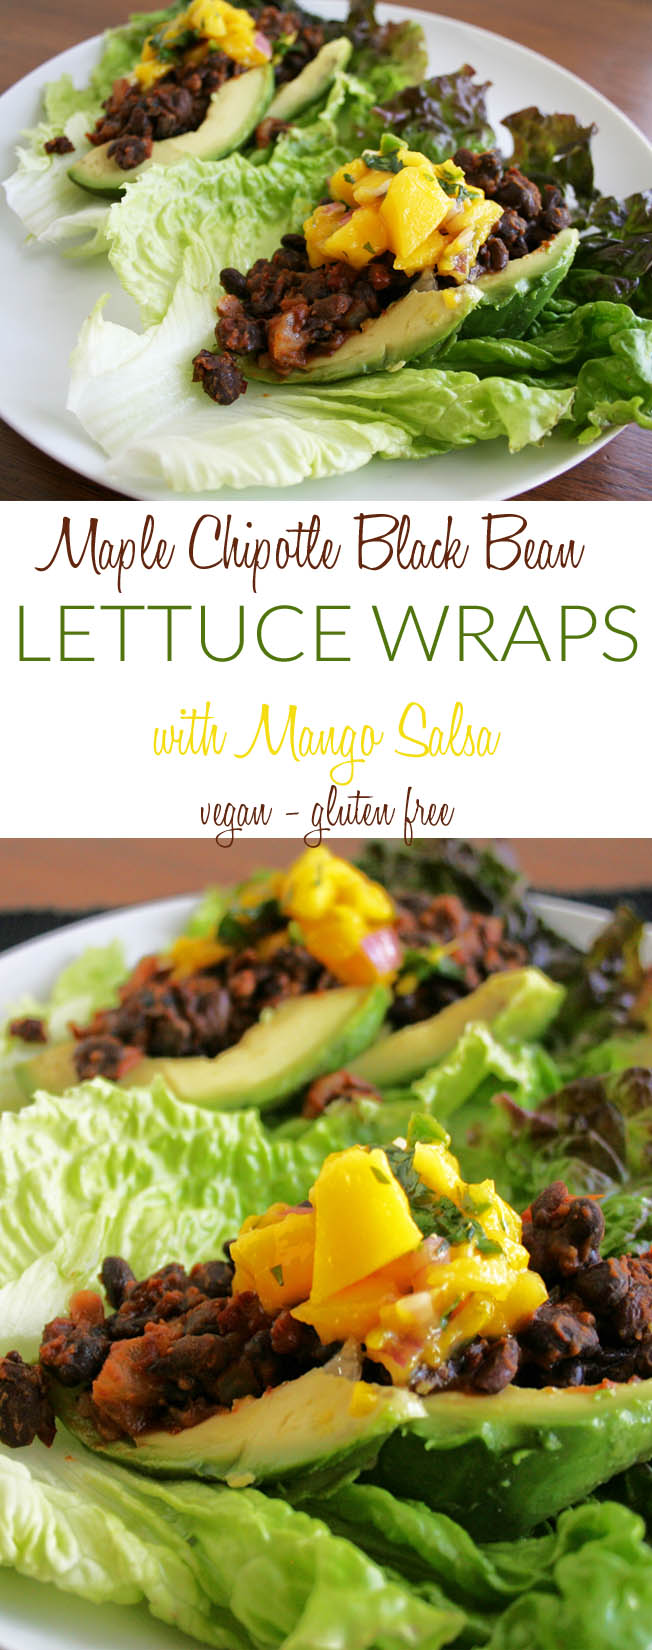 Maple Chipotle Black Bean Lettuce Wraps with Mango Salsa collage photo with text.